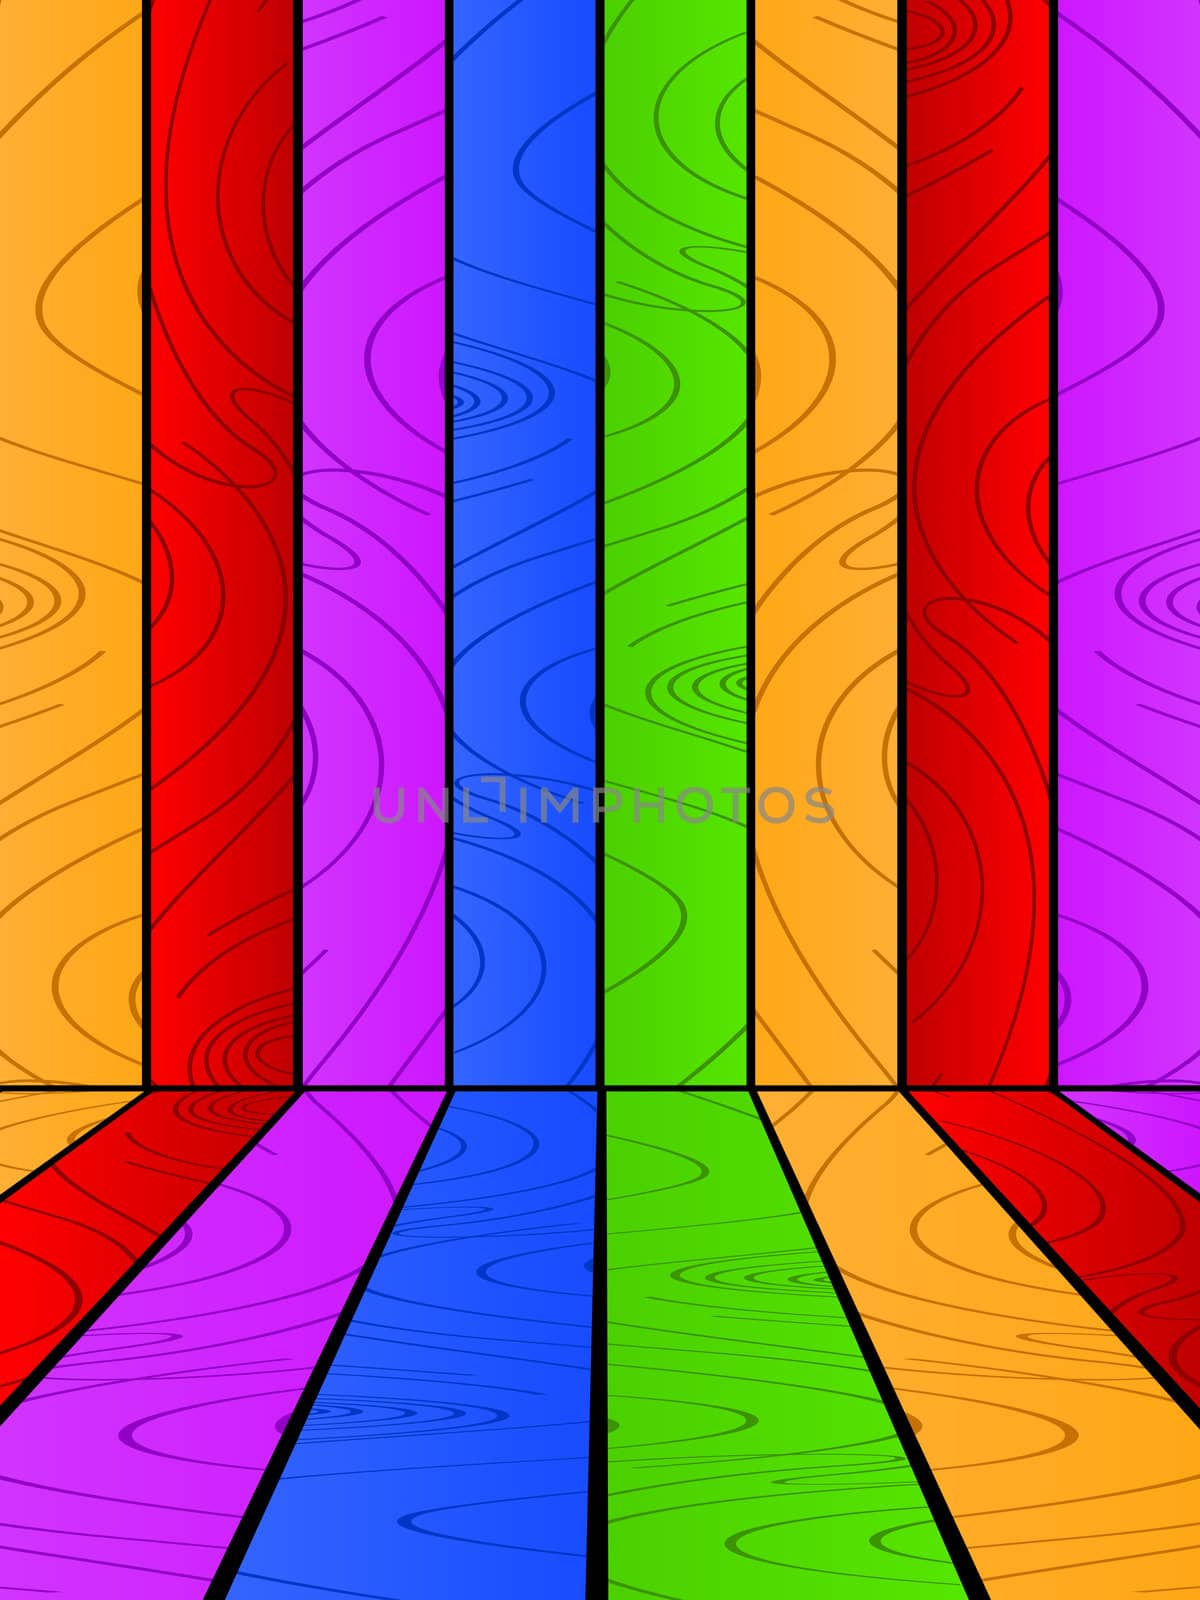 Multicolored wooden background, abstract art illustration